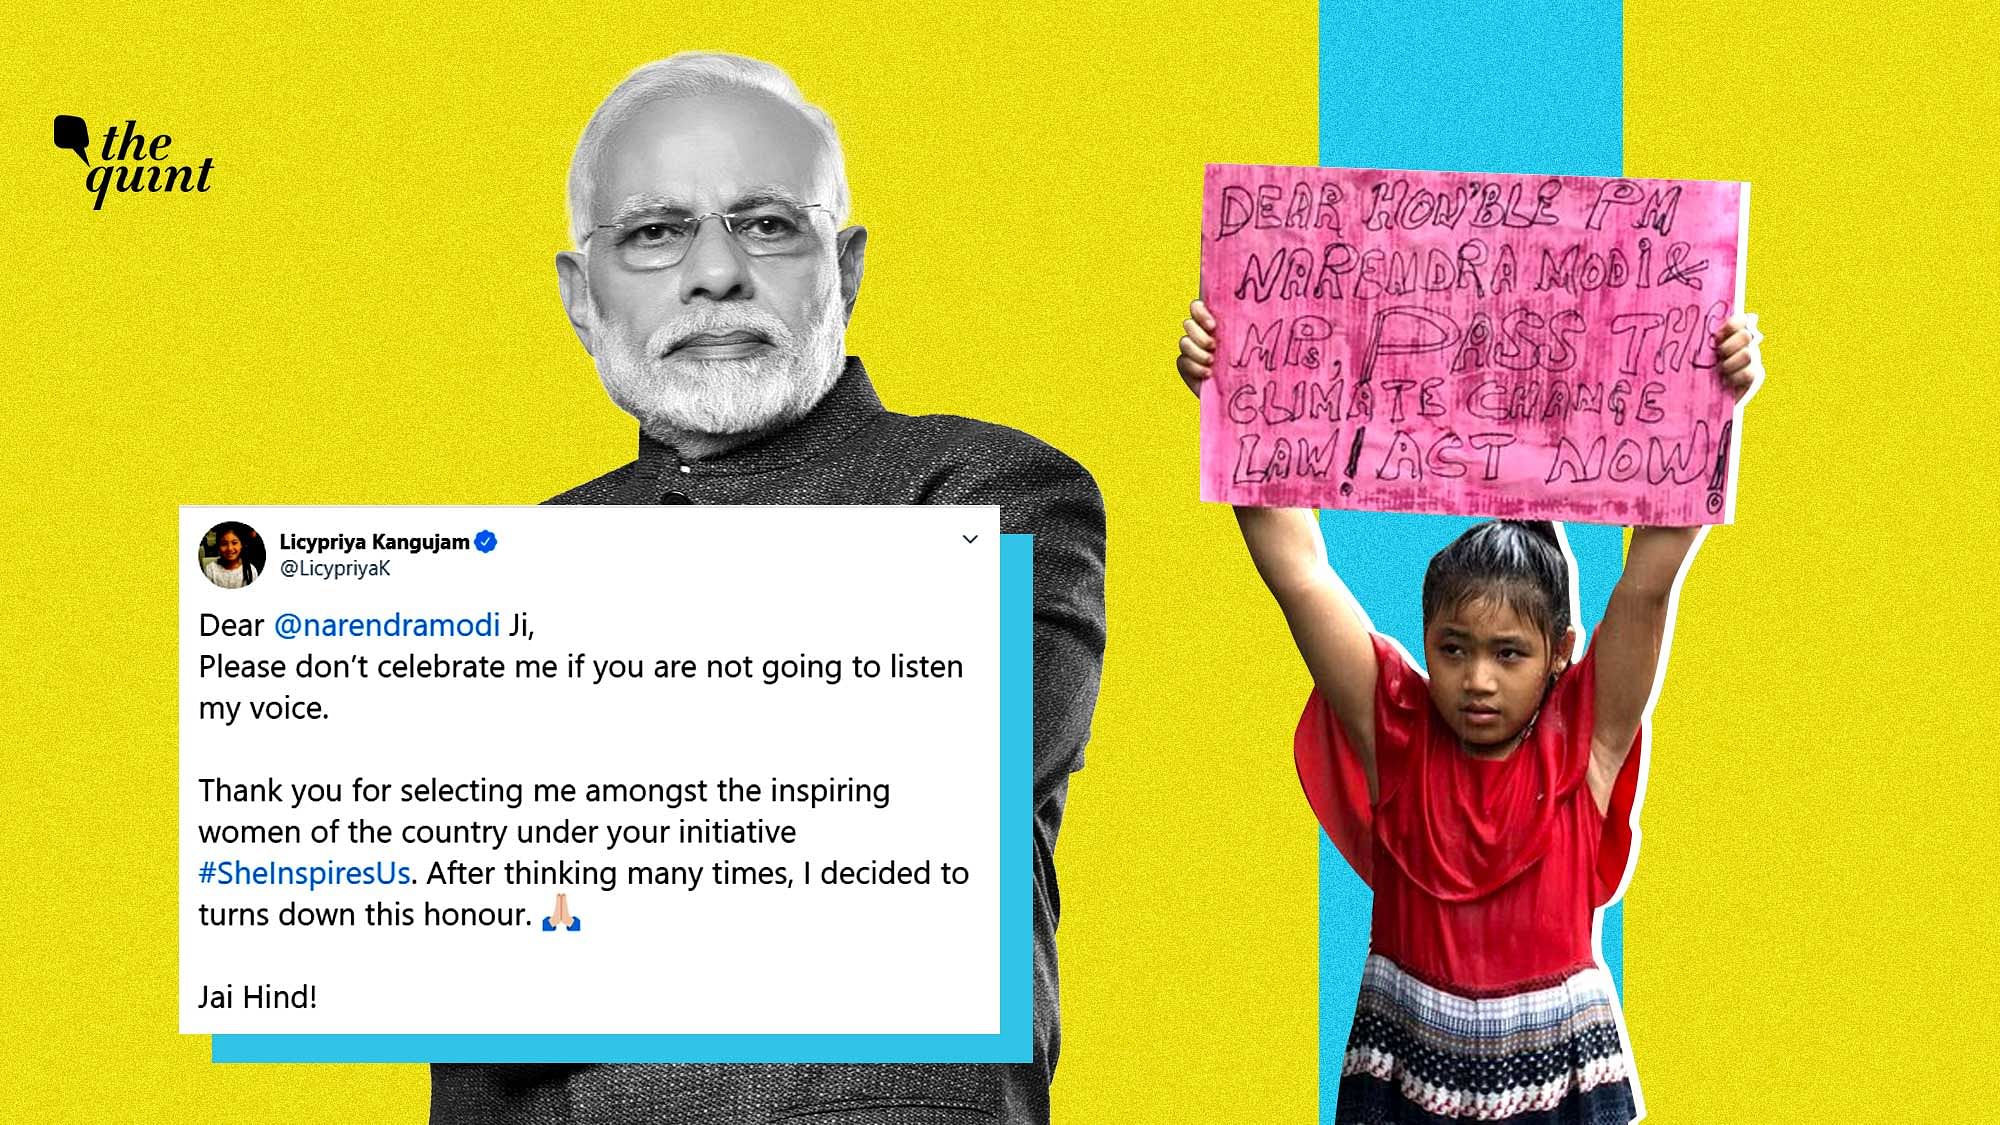 “Please don’t celebrate me if you are not going to listen my voice,” Kangujam tweeted in response to a tweet by MyGovIndia, a citizen engagement platform of the government.